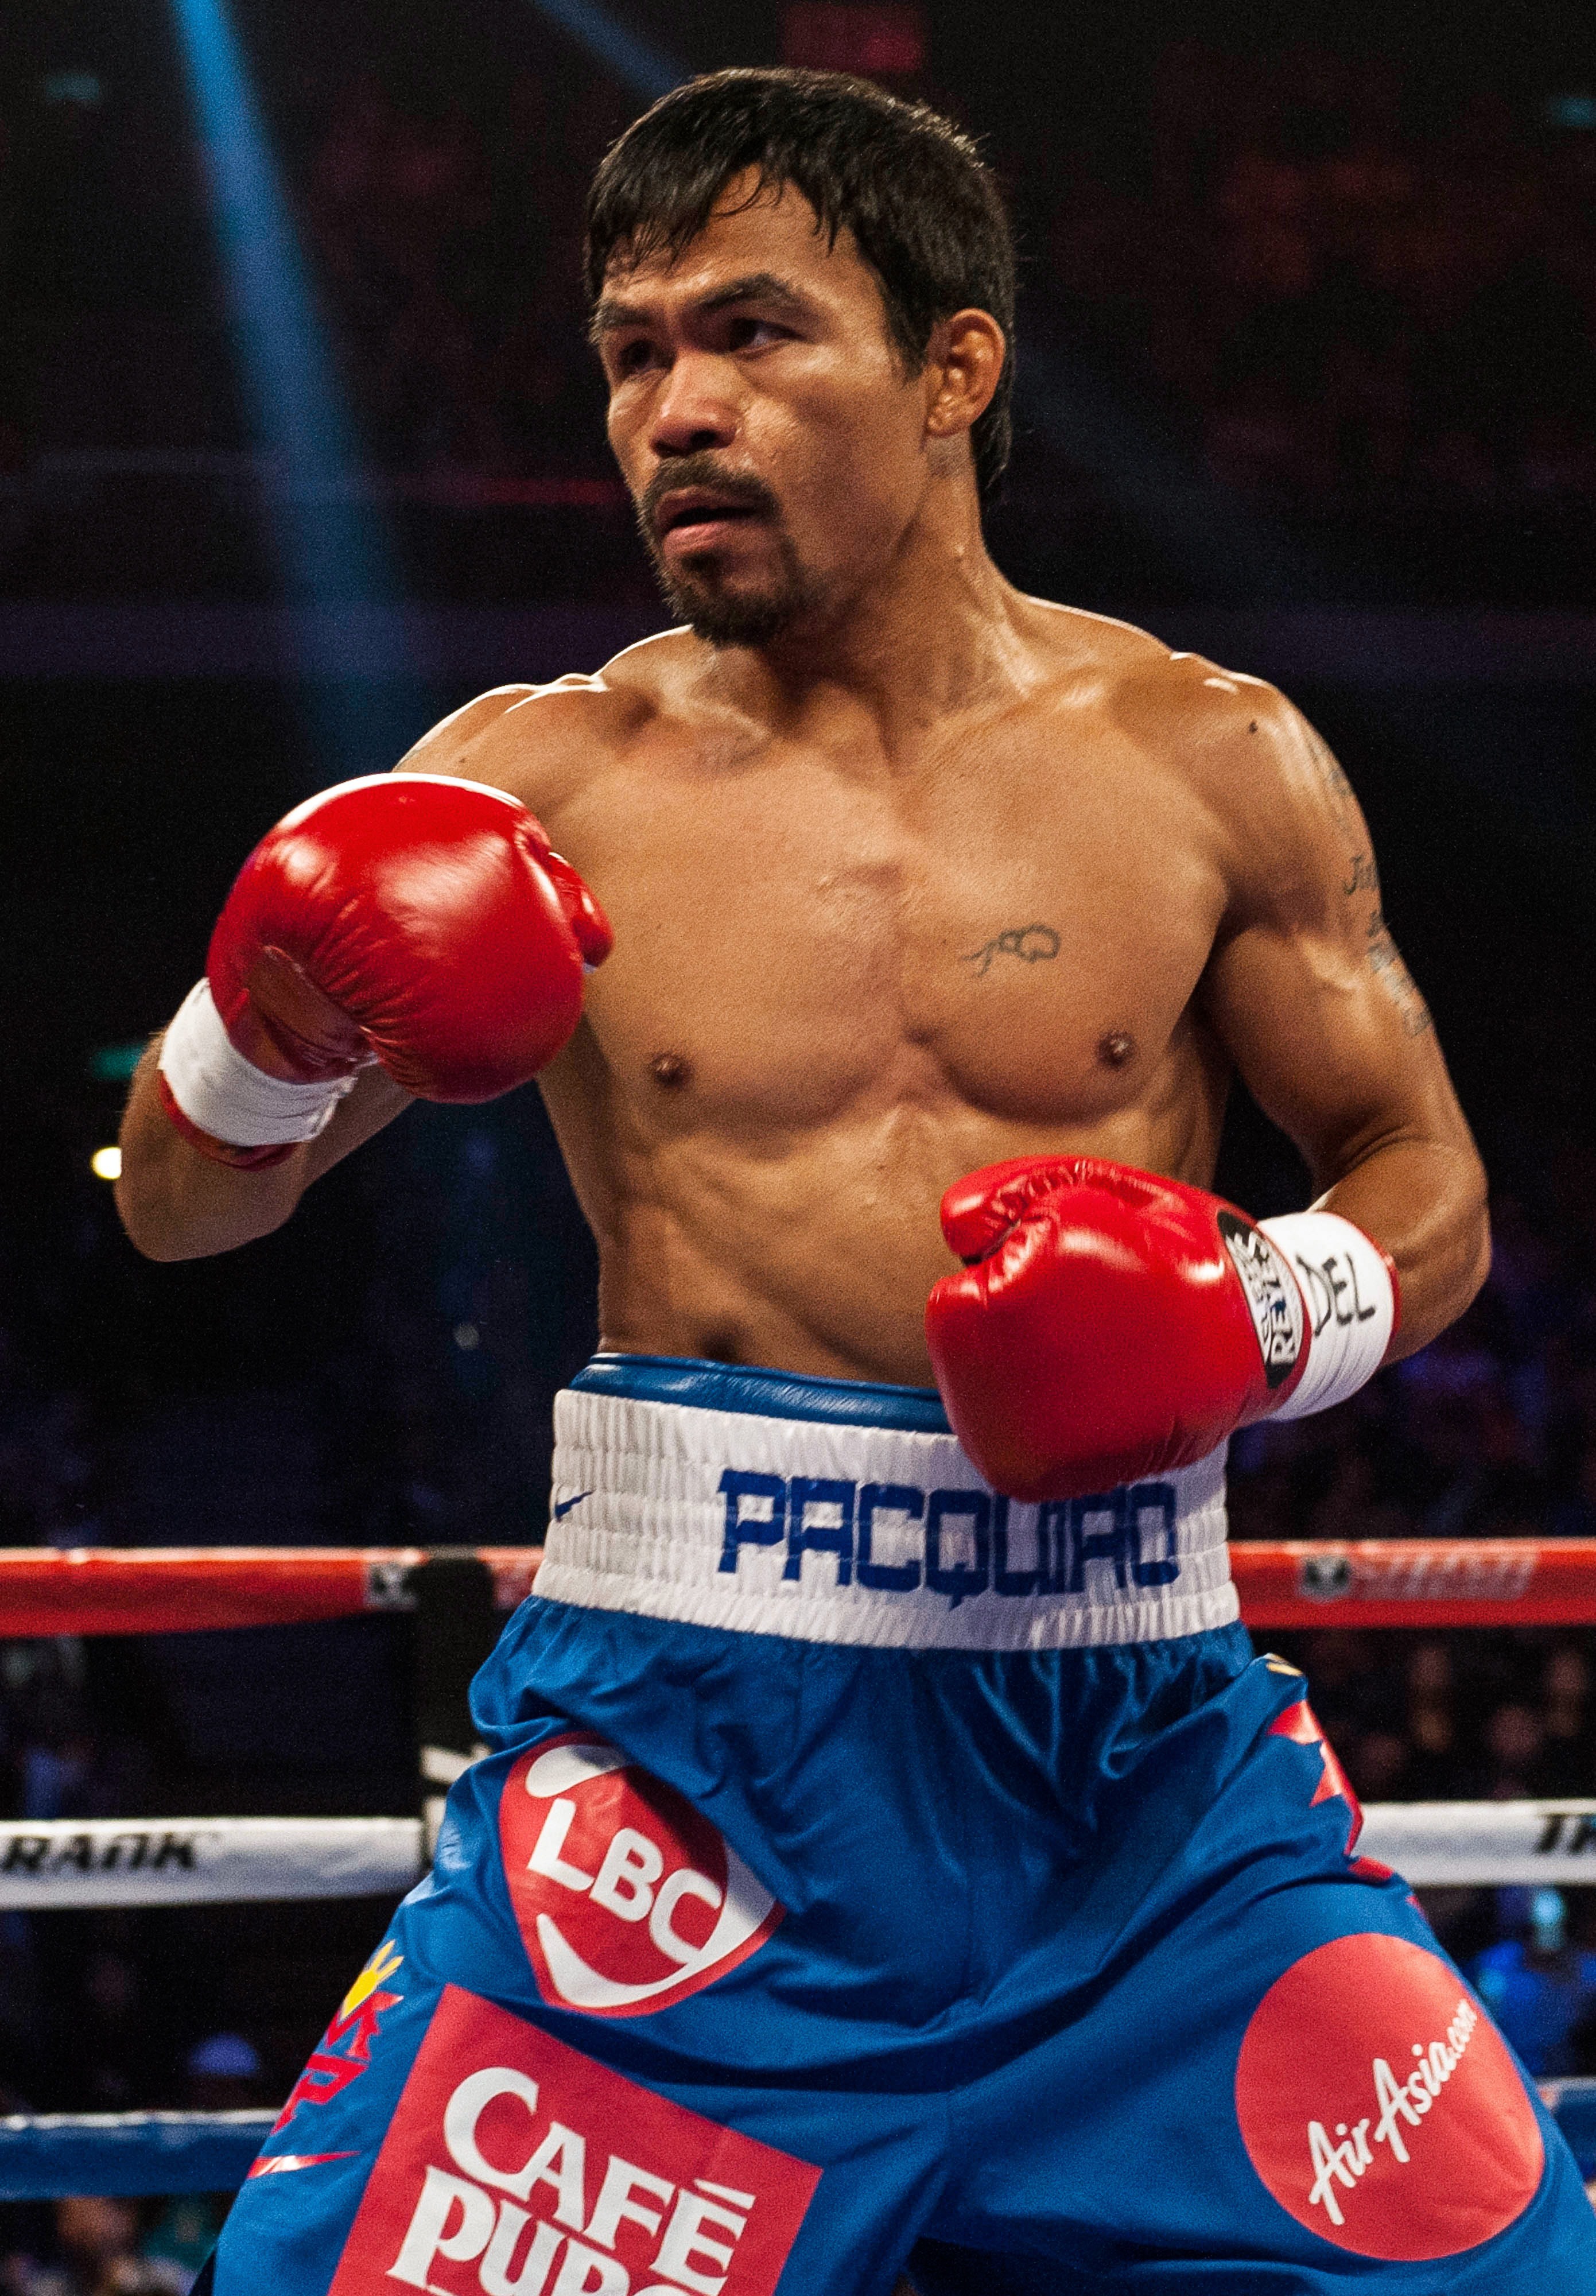 Manny Pacquiao was the second richest athlete in the world in 2015